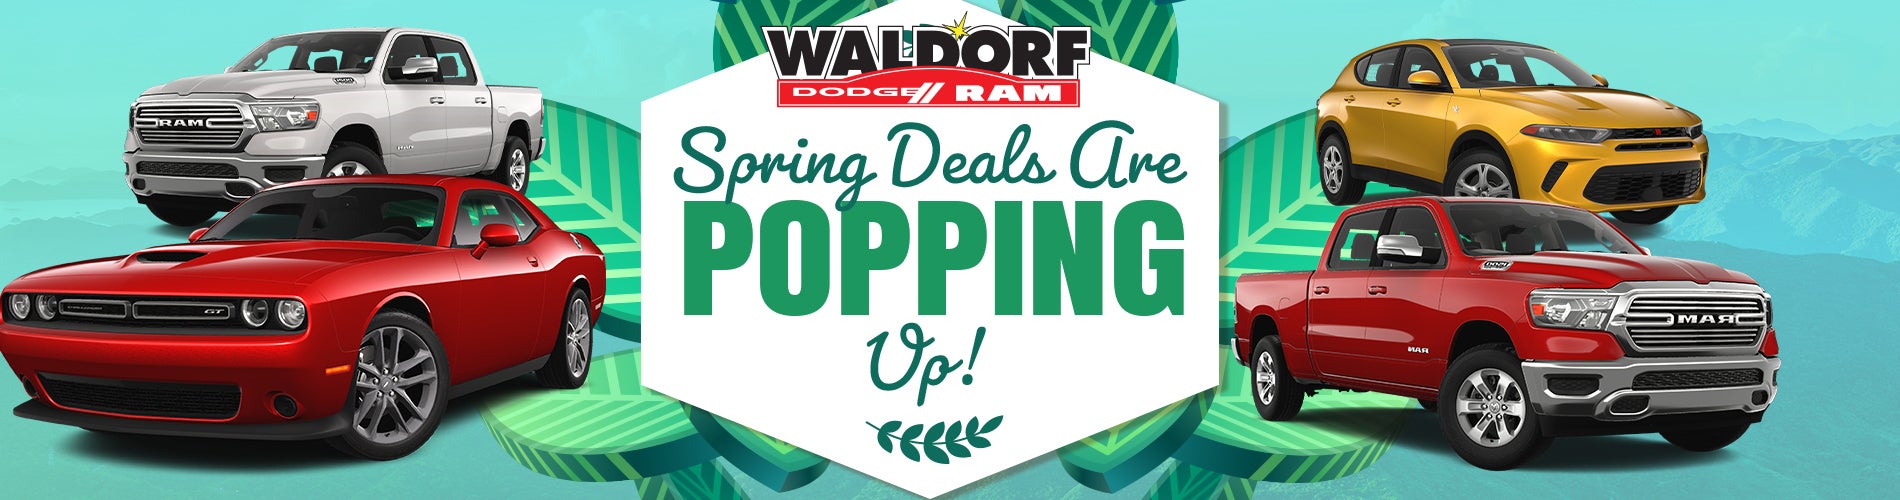 Spring Deals Are Popping Up!